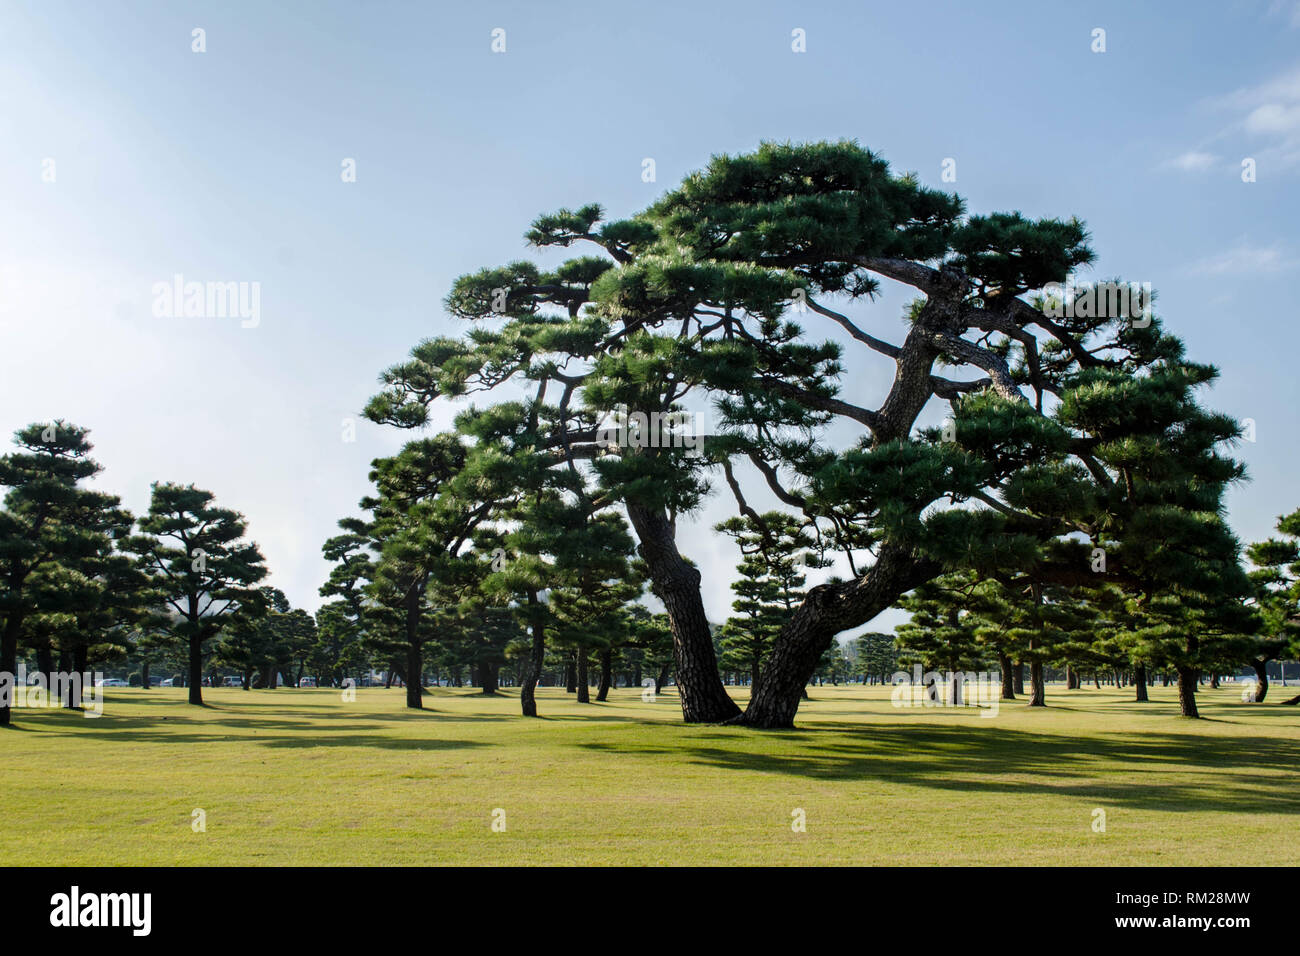 Japanese Black Pines on the grassy lawn of the Imperial Palace, Tokyo, Japan Stock Photo